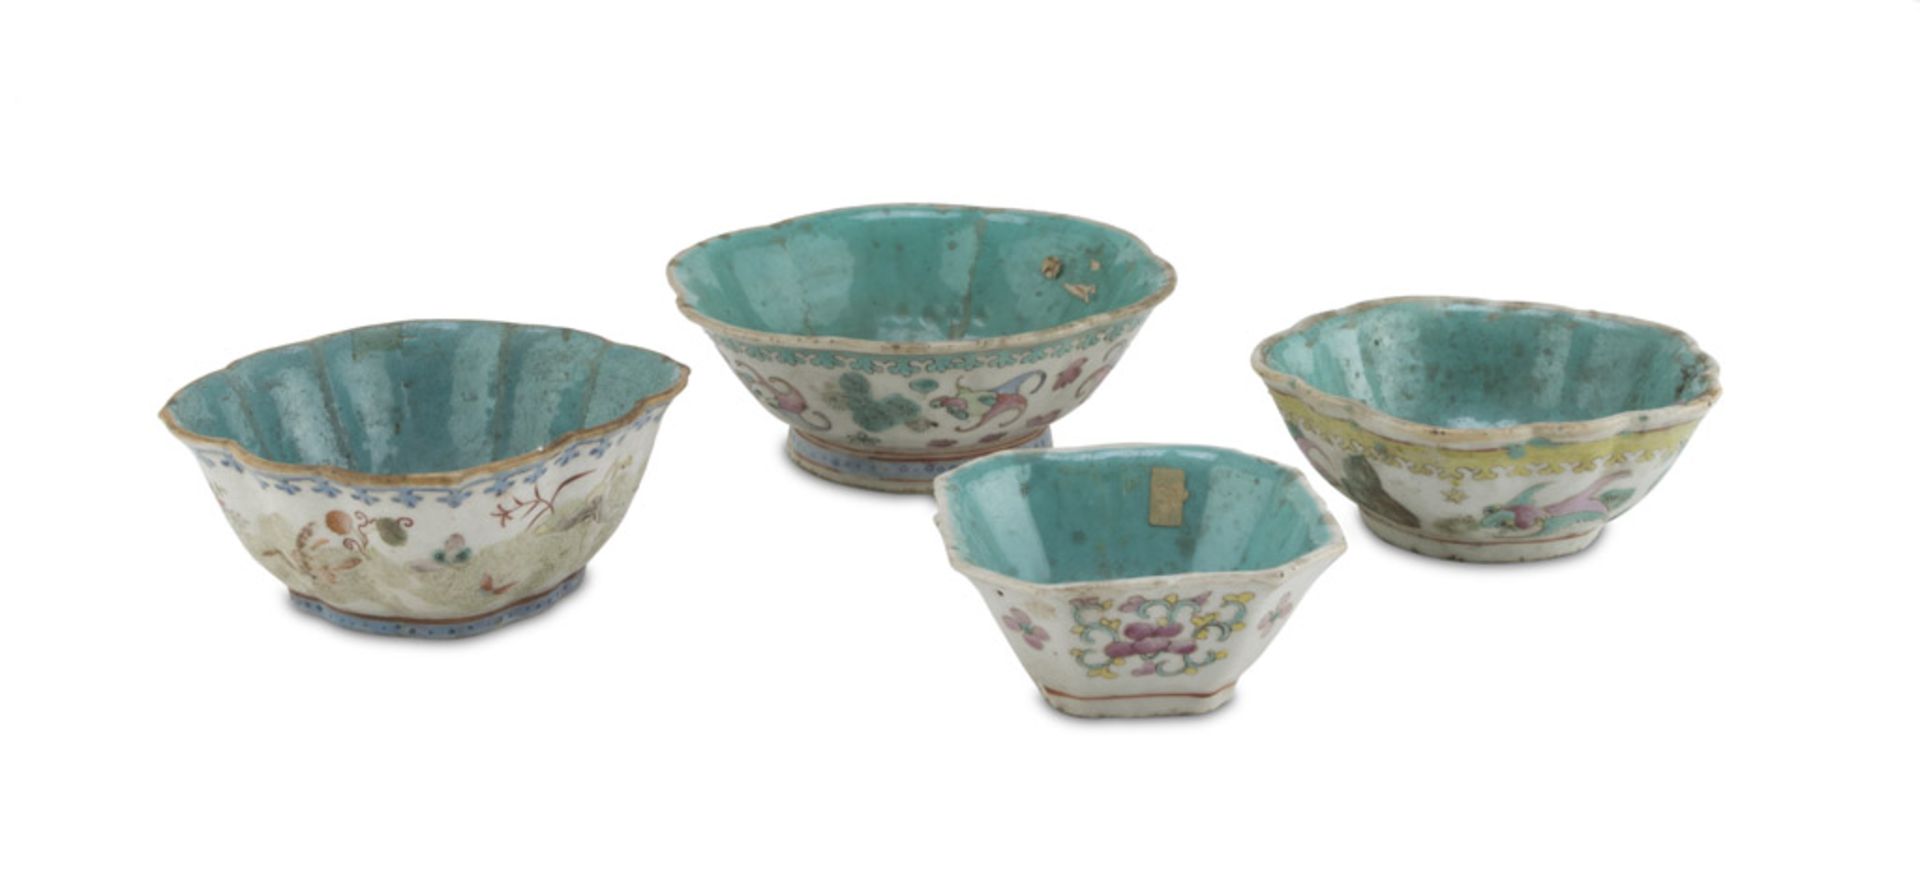 FOUR POLYCHROME ENAMELLED PORCELAIN BOWLS, CHINA EARLY 20TH CENTURY bodies decorated with fishes,